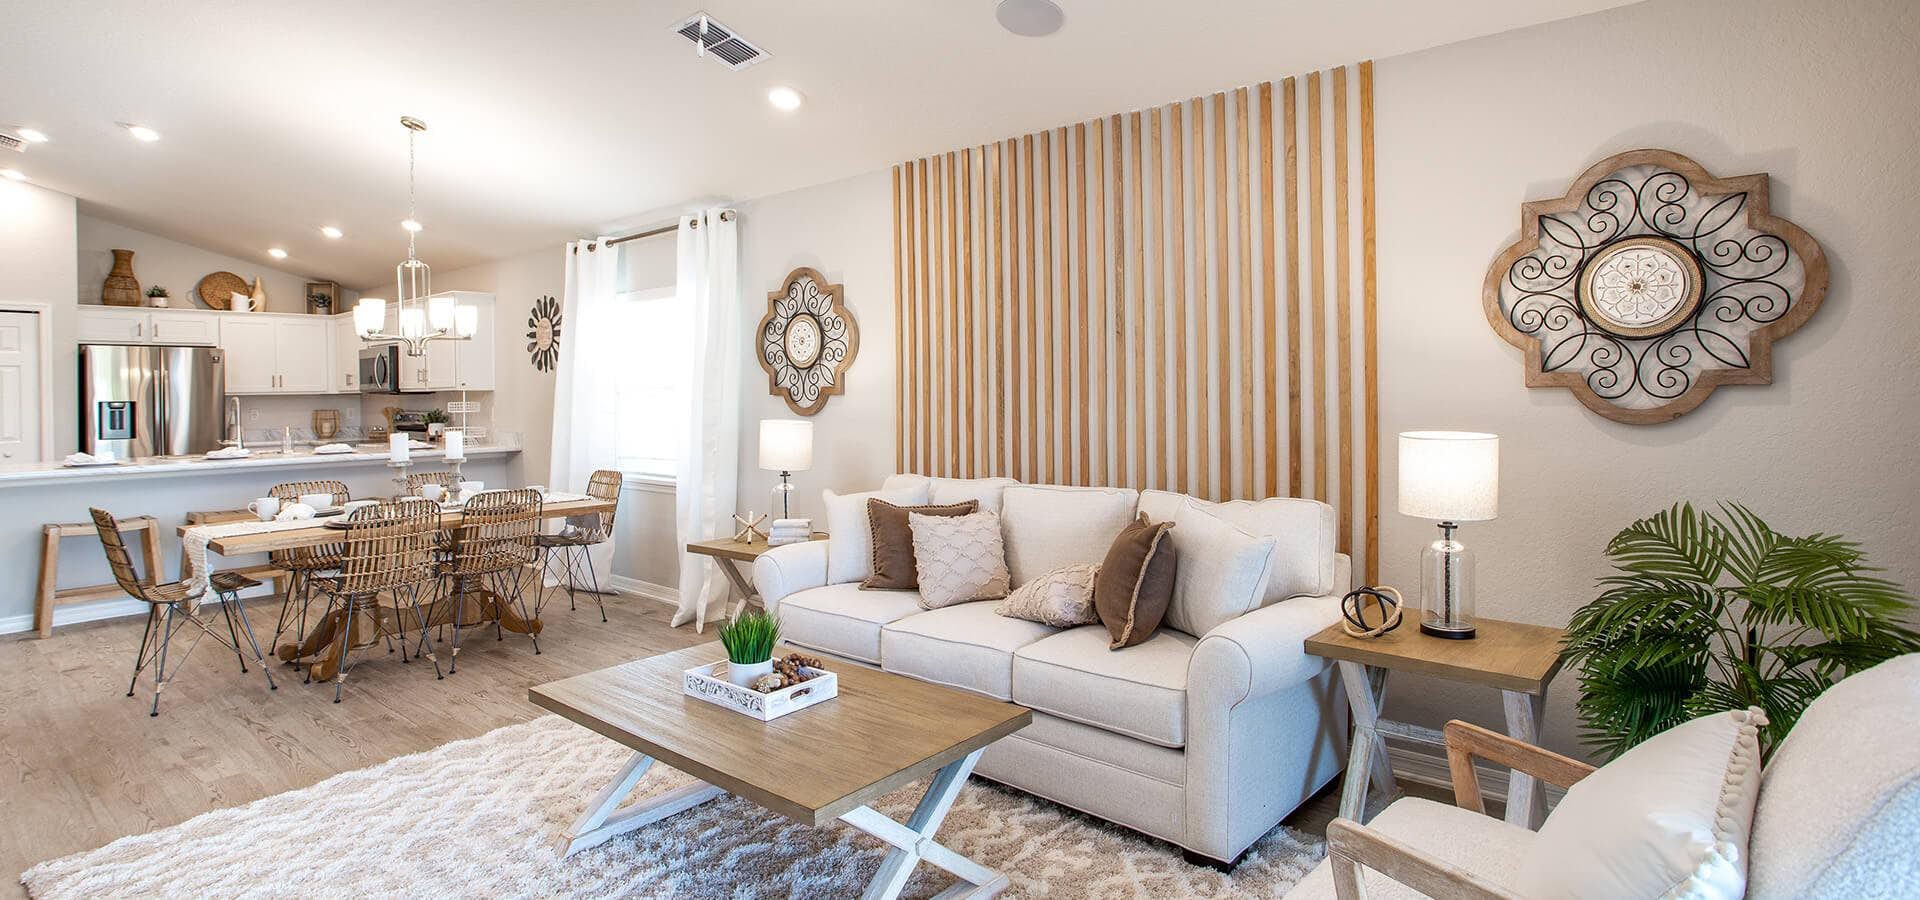 Boho style decor with wood slat accent wall - Florida home design trends